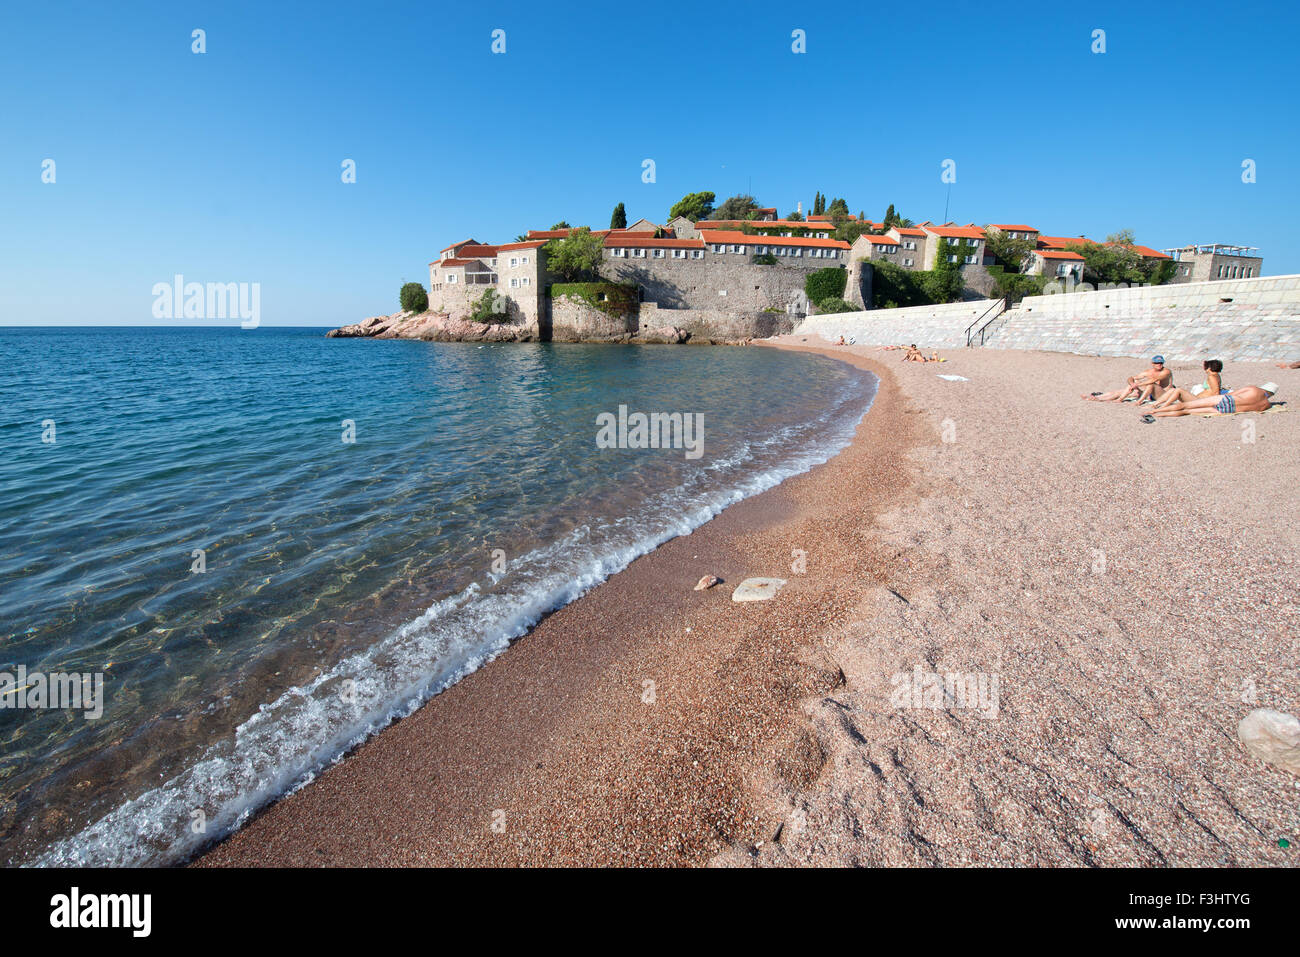 Tourists sun bathing on the beach in front of Sveti Stefan (Saint Stephen) islet and hotel resort, Montenegro Stock Photo